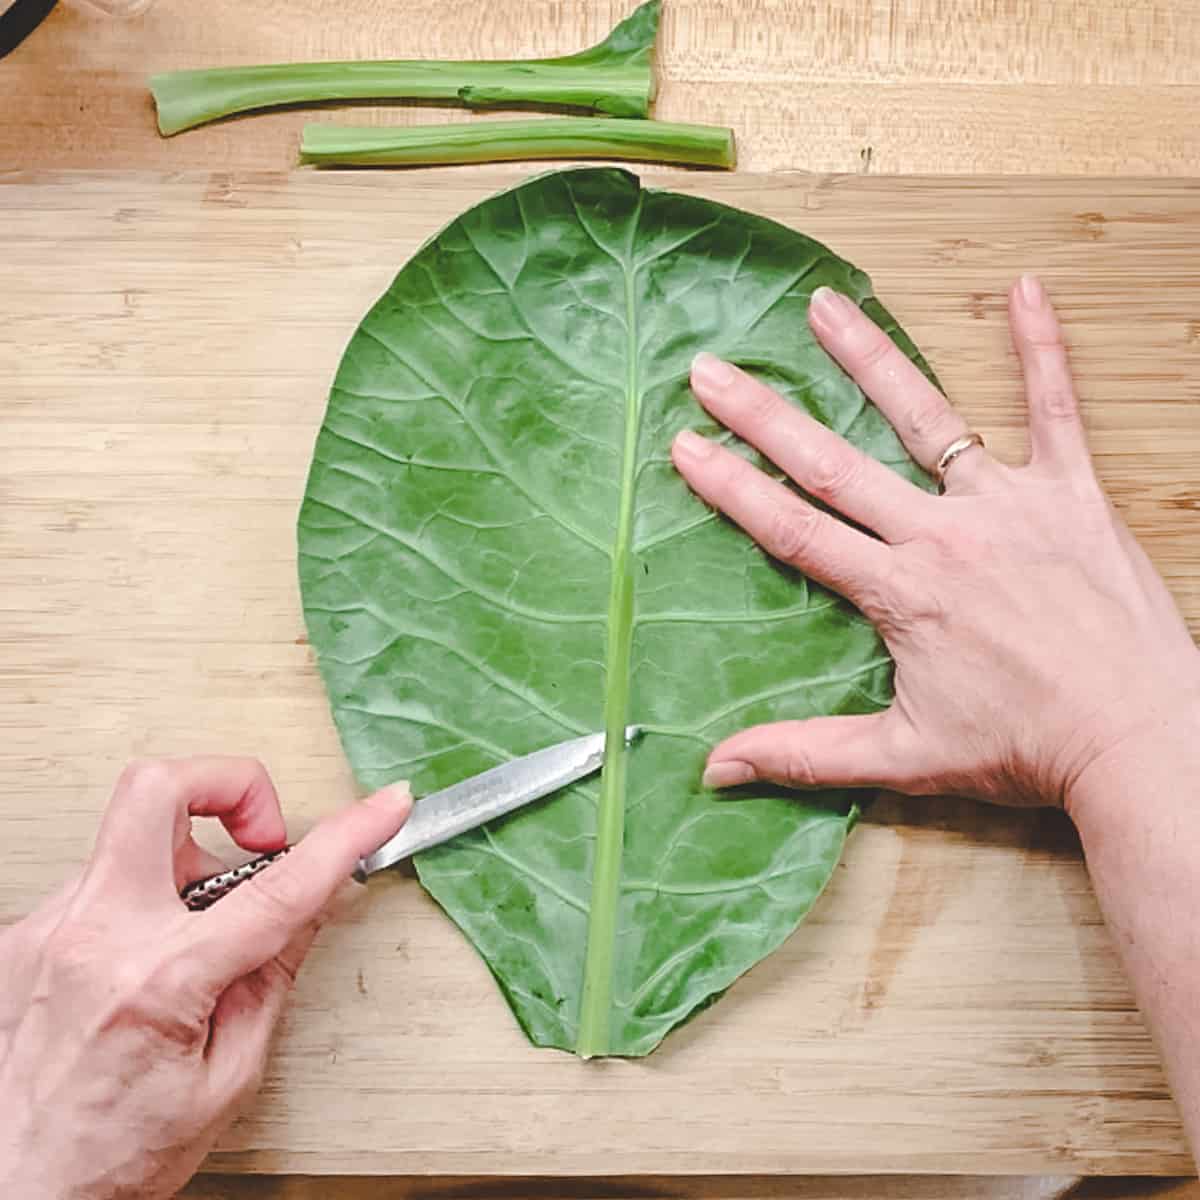 trimming the stem of the collard green leaf. 